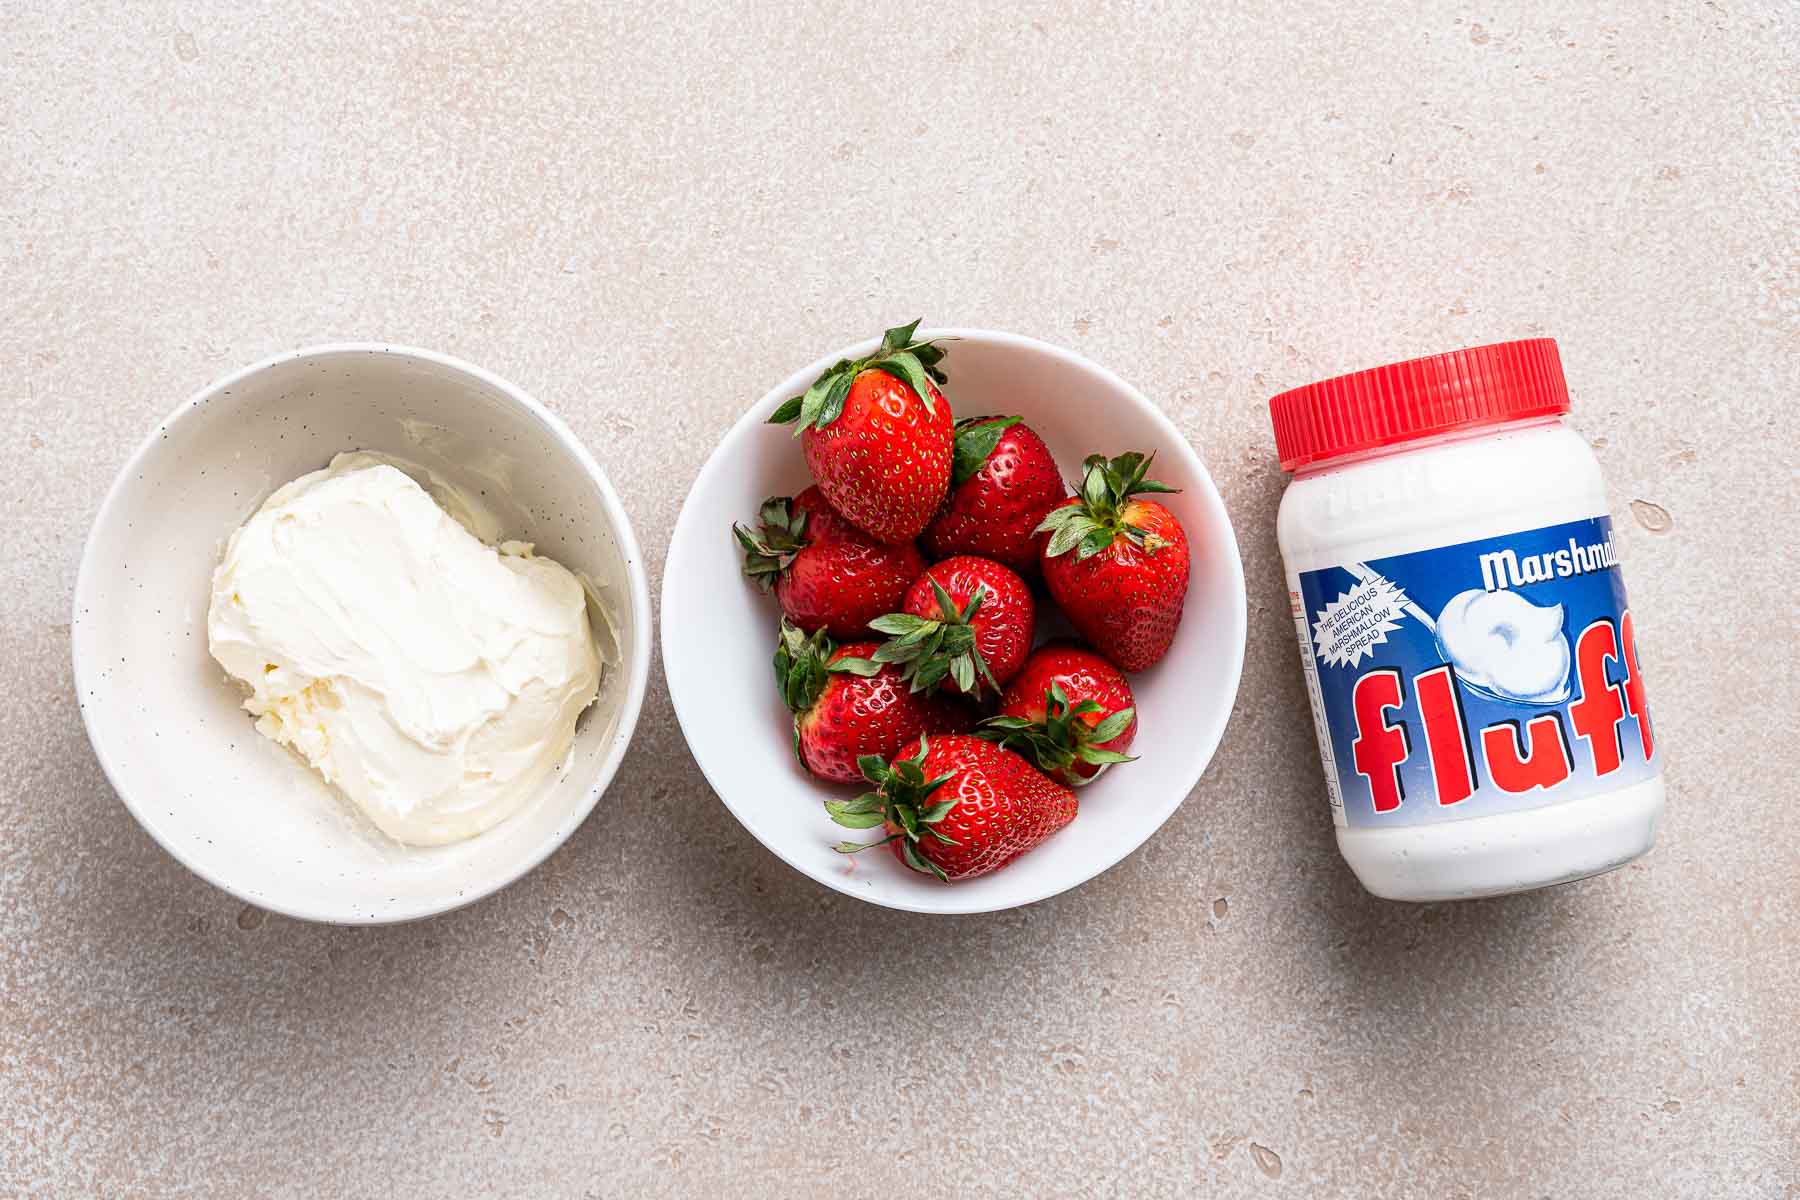 Cream cheese, strawberries, and marshmallow fluff on table.